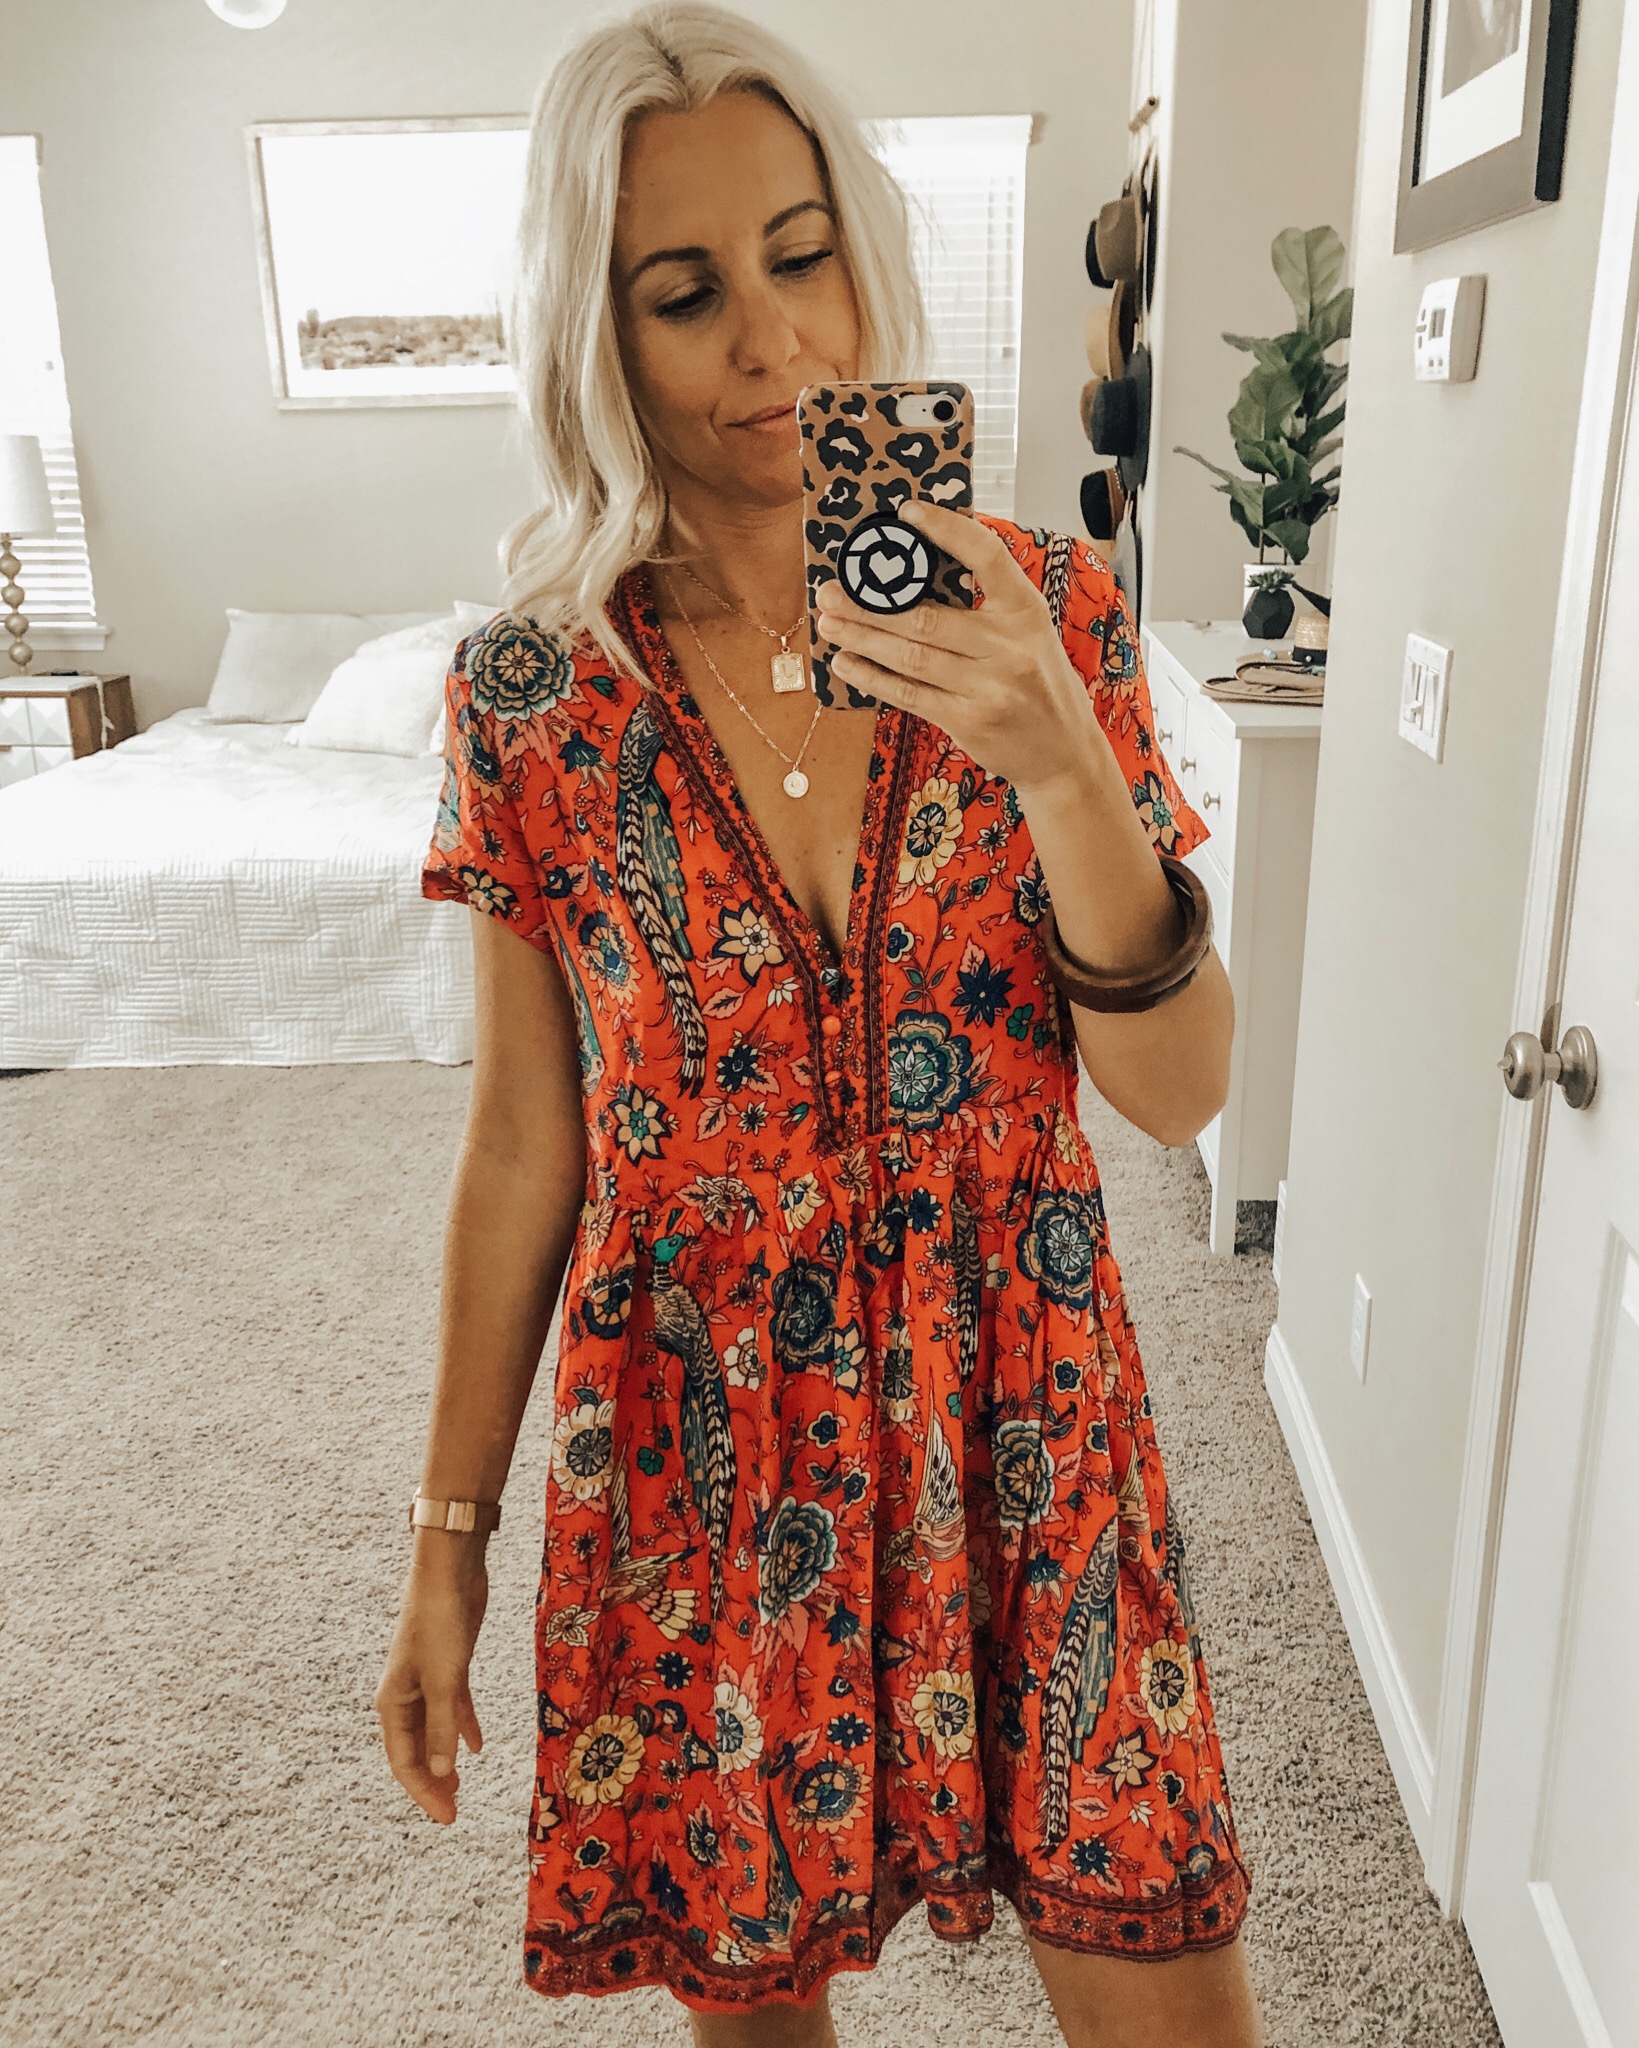 JUNE TOP 10- Jaclyn De Leon Style- No surprise that 8 out of the top 10 sellers were Amazon Finds. Favorites from boho dresses, to jewelry organizer, espadrilles and the glow and get it stick.